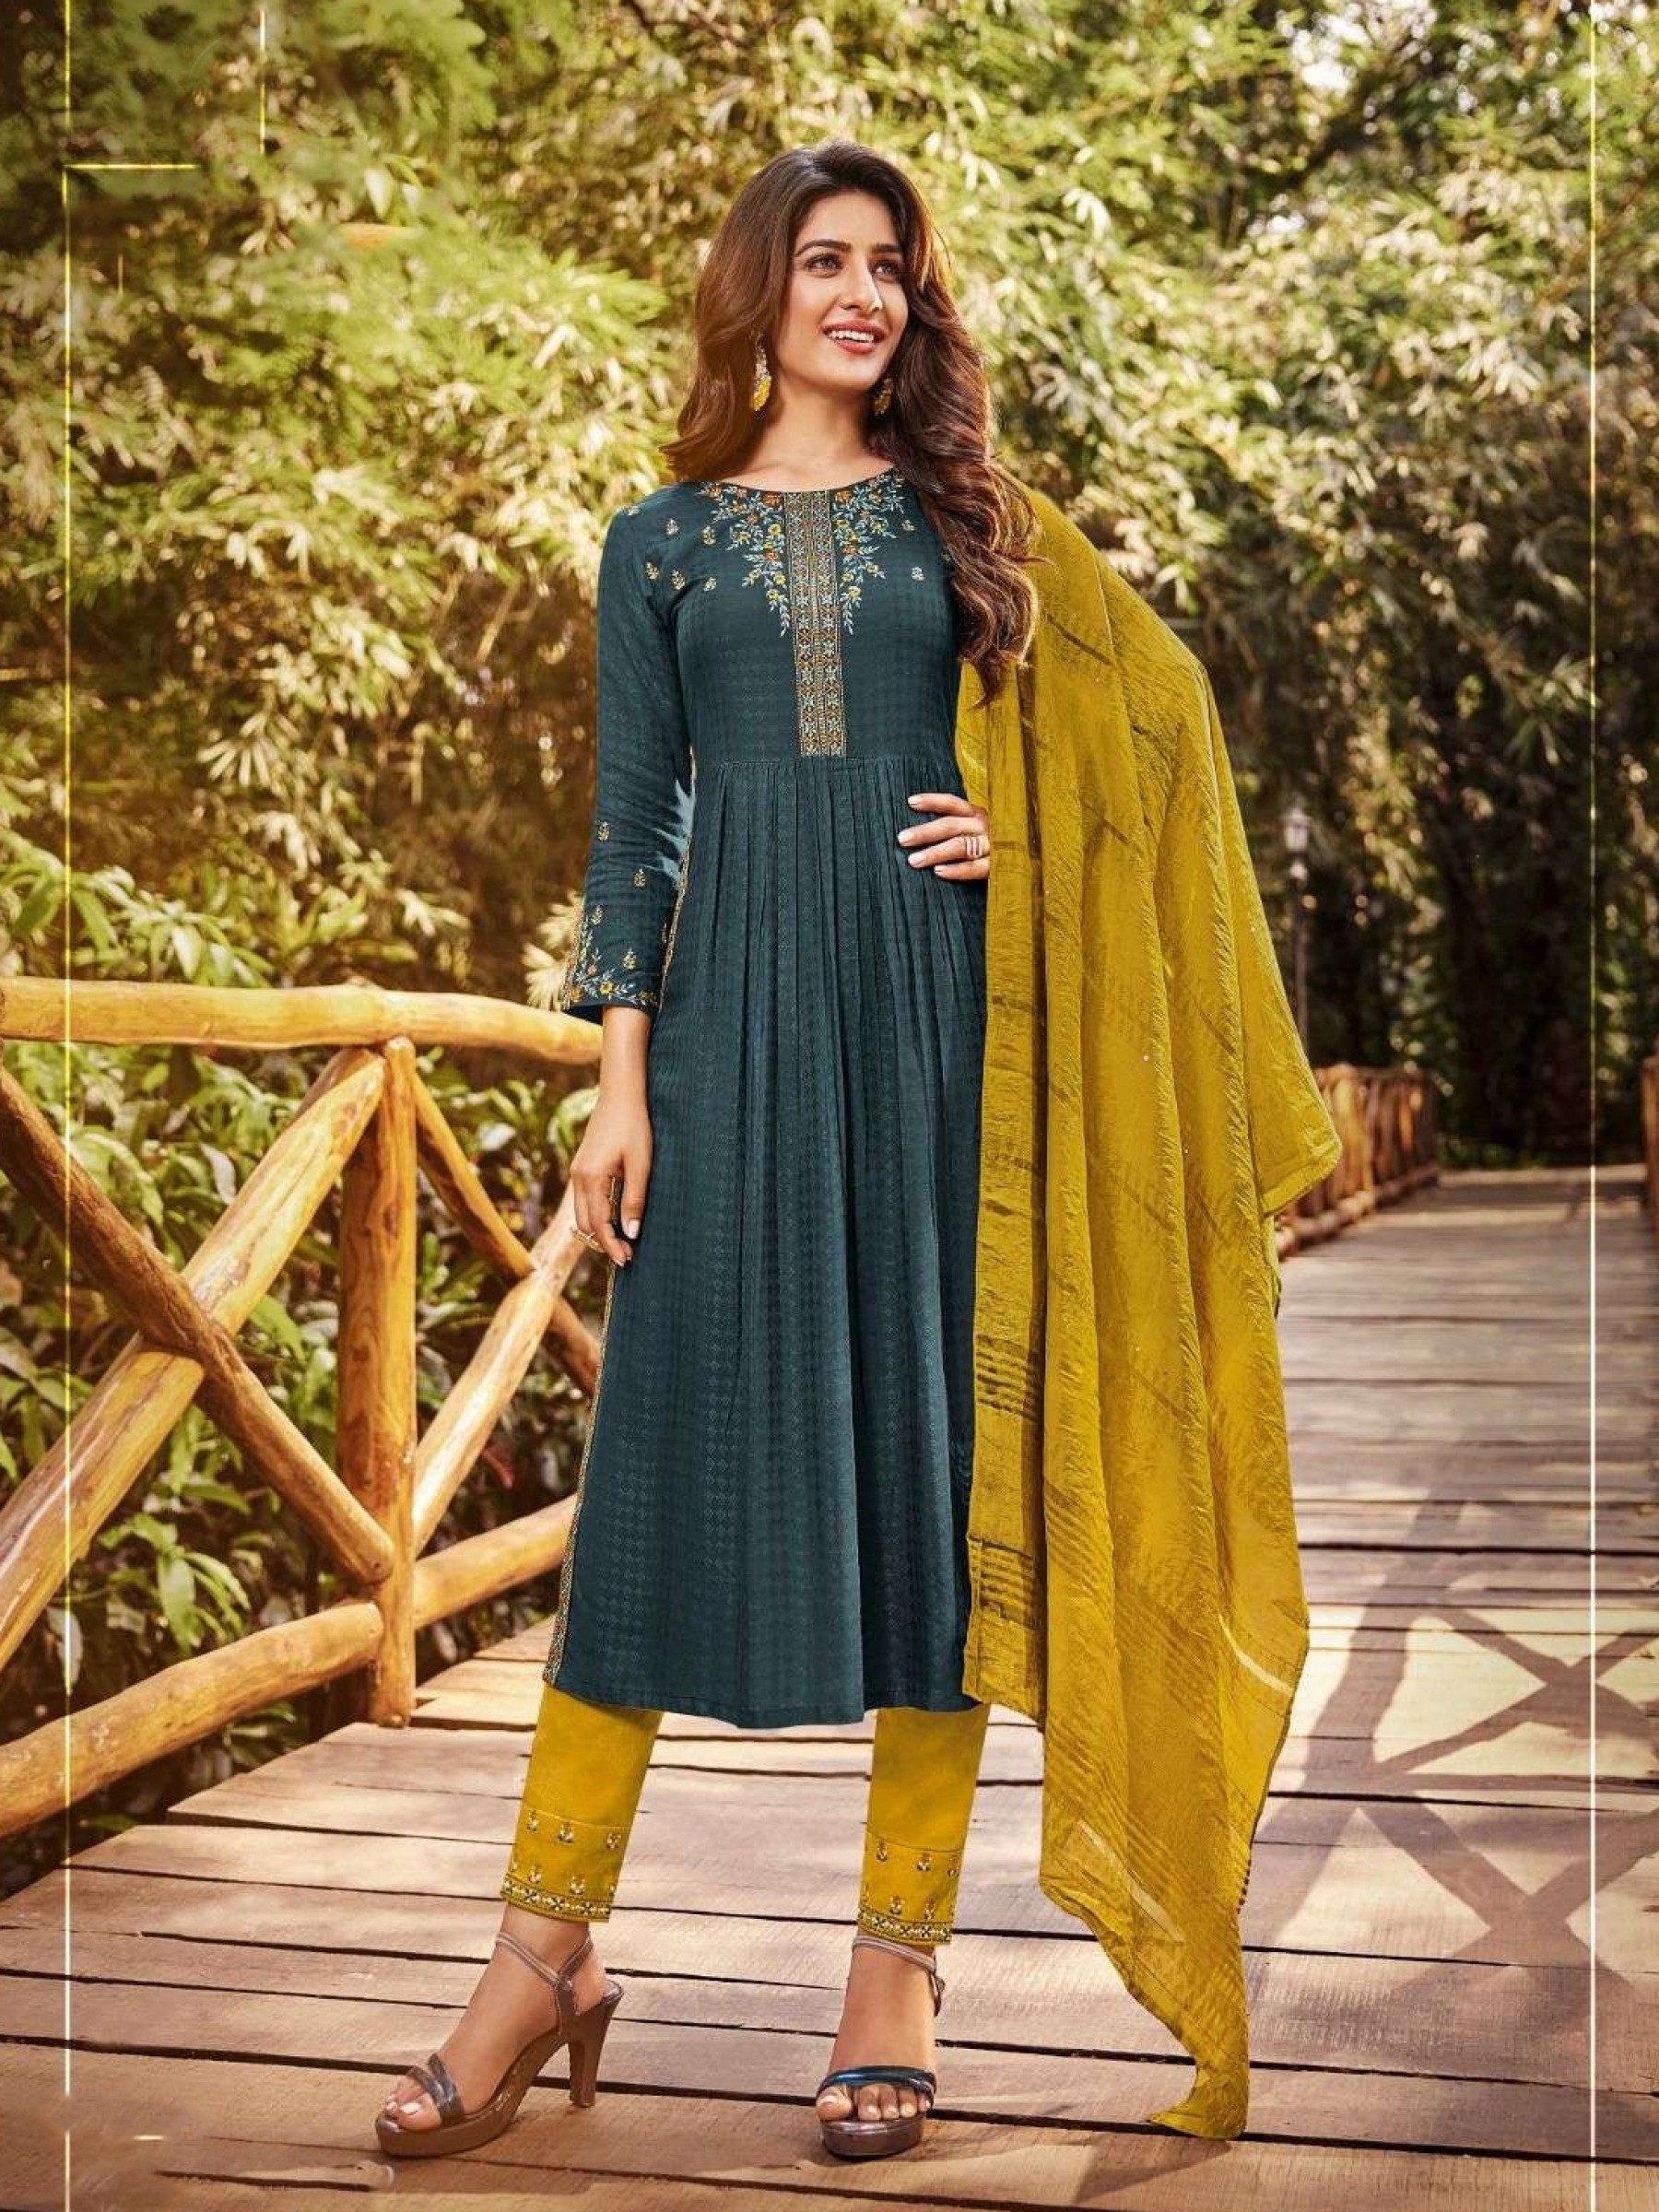 Heavy Rayon Party Wear Suit in Teal Color With Embroidery Work